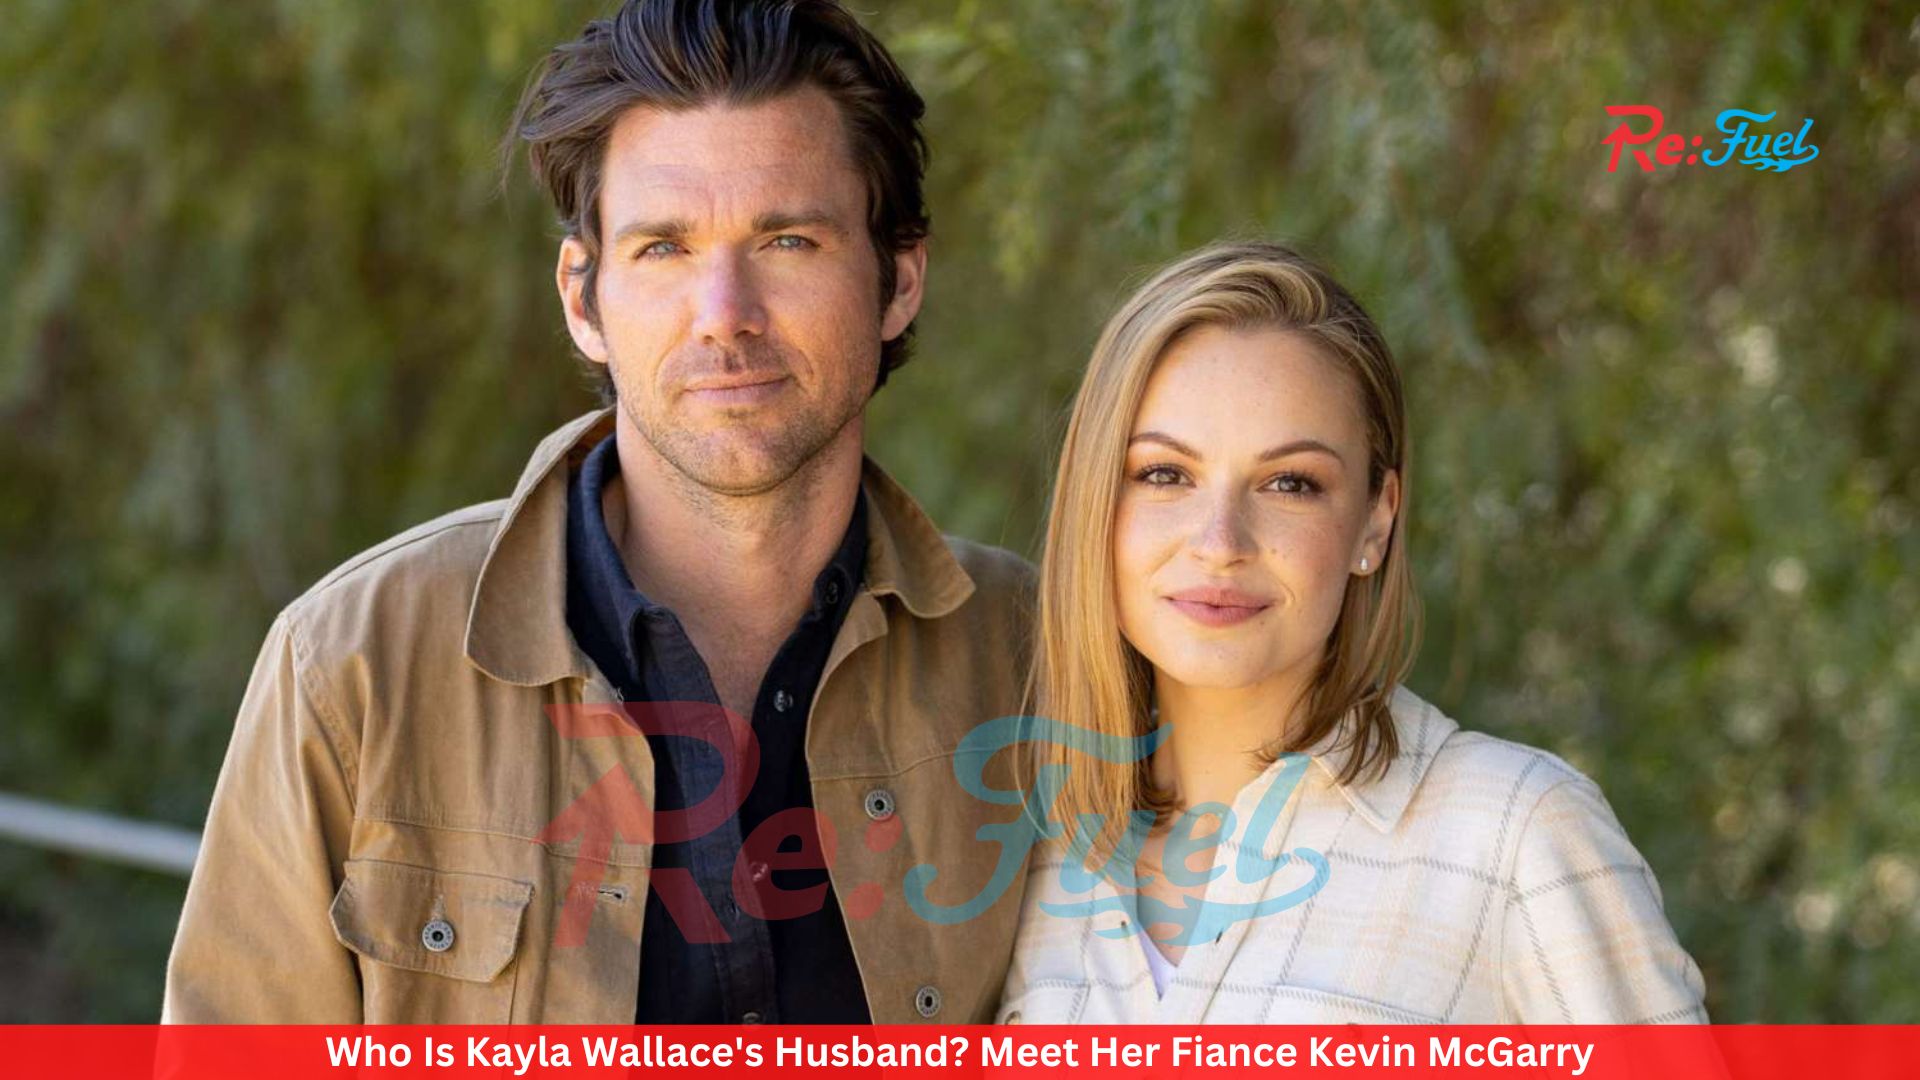 Who Is Kayla Wallace's Husband? Meet Her Fiance Kevin McGarry